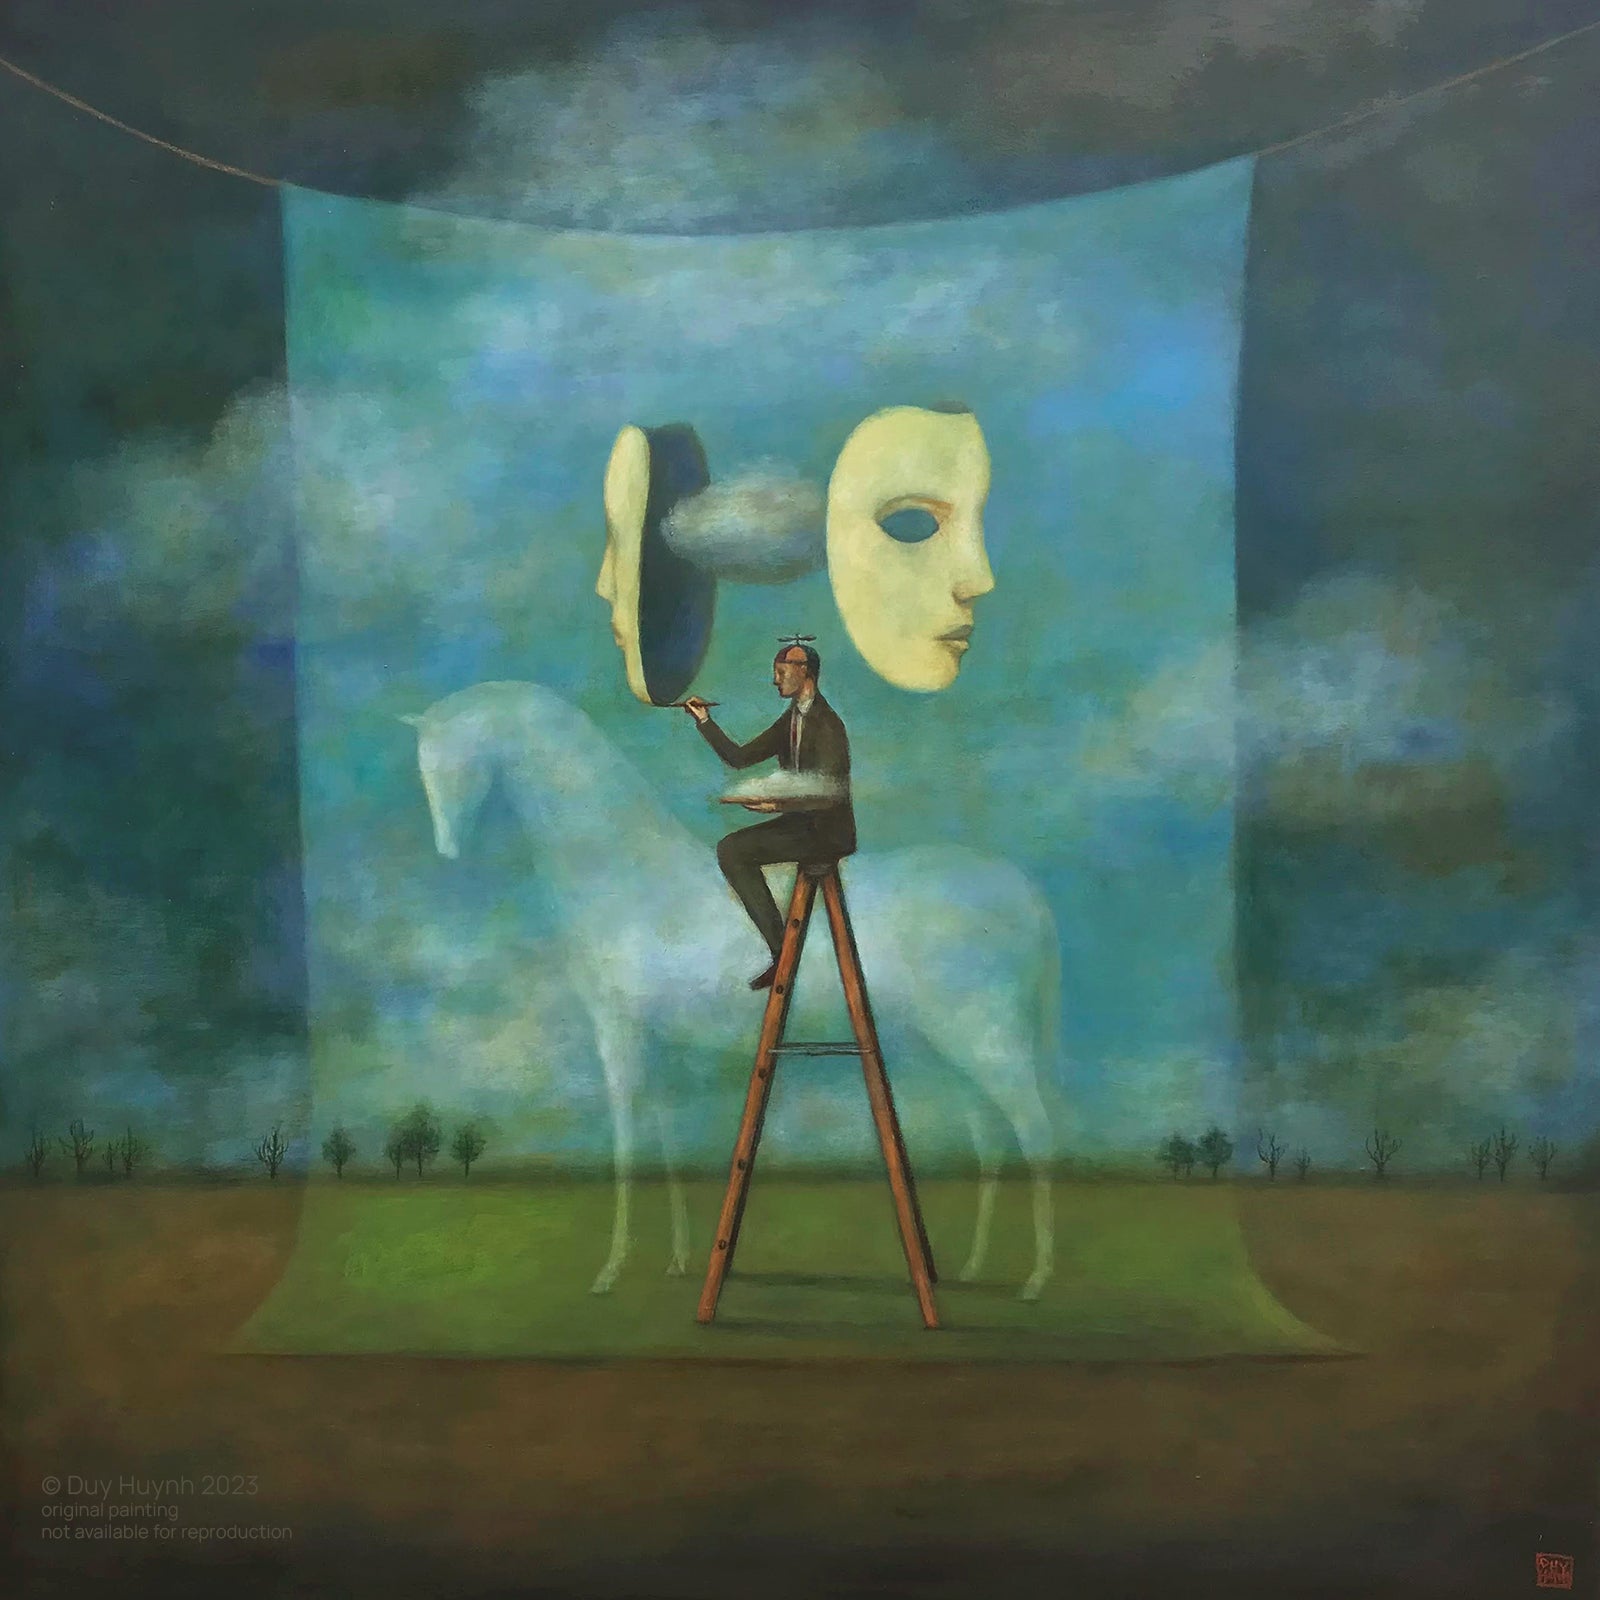 Artist Duy Huynh 's painting called "Imposter Syndrome". Painting inspired by the idea of imposter syndrome. A man sits on top of a ladder, a faint image of a horse at its side. The man paints face masks facing opposite directions. Available at Lark & Key, Charlotte NC.